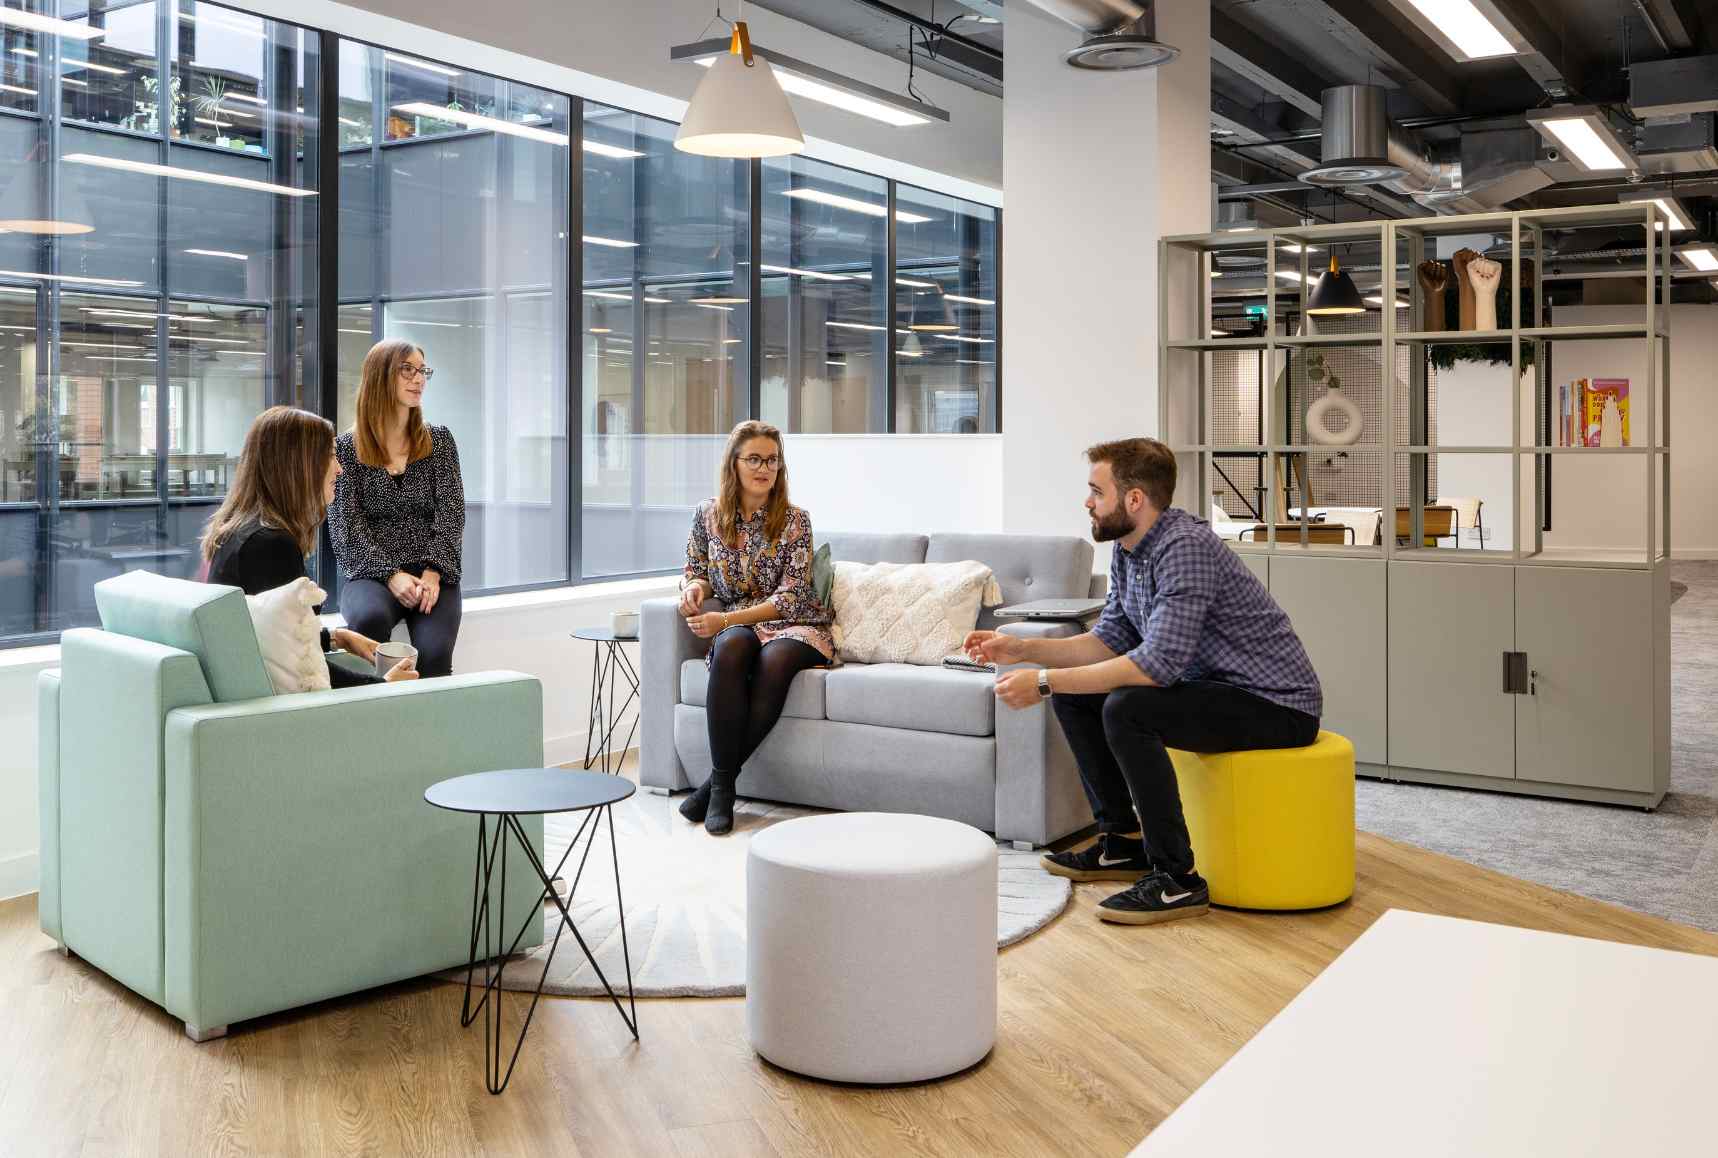 Employees sitting on stools and sofas having a conversation, office design by Interaction.